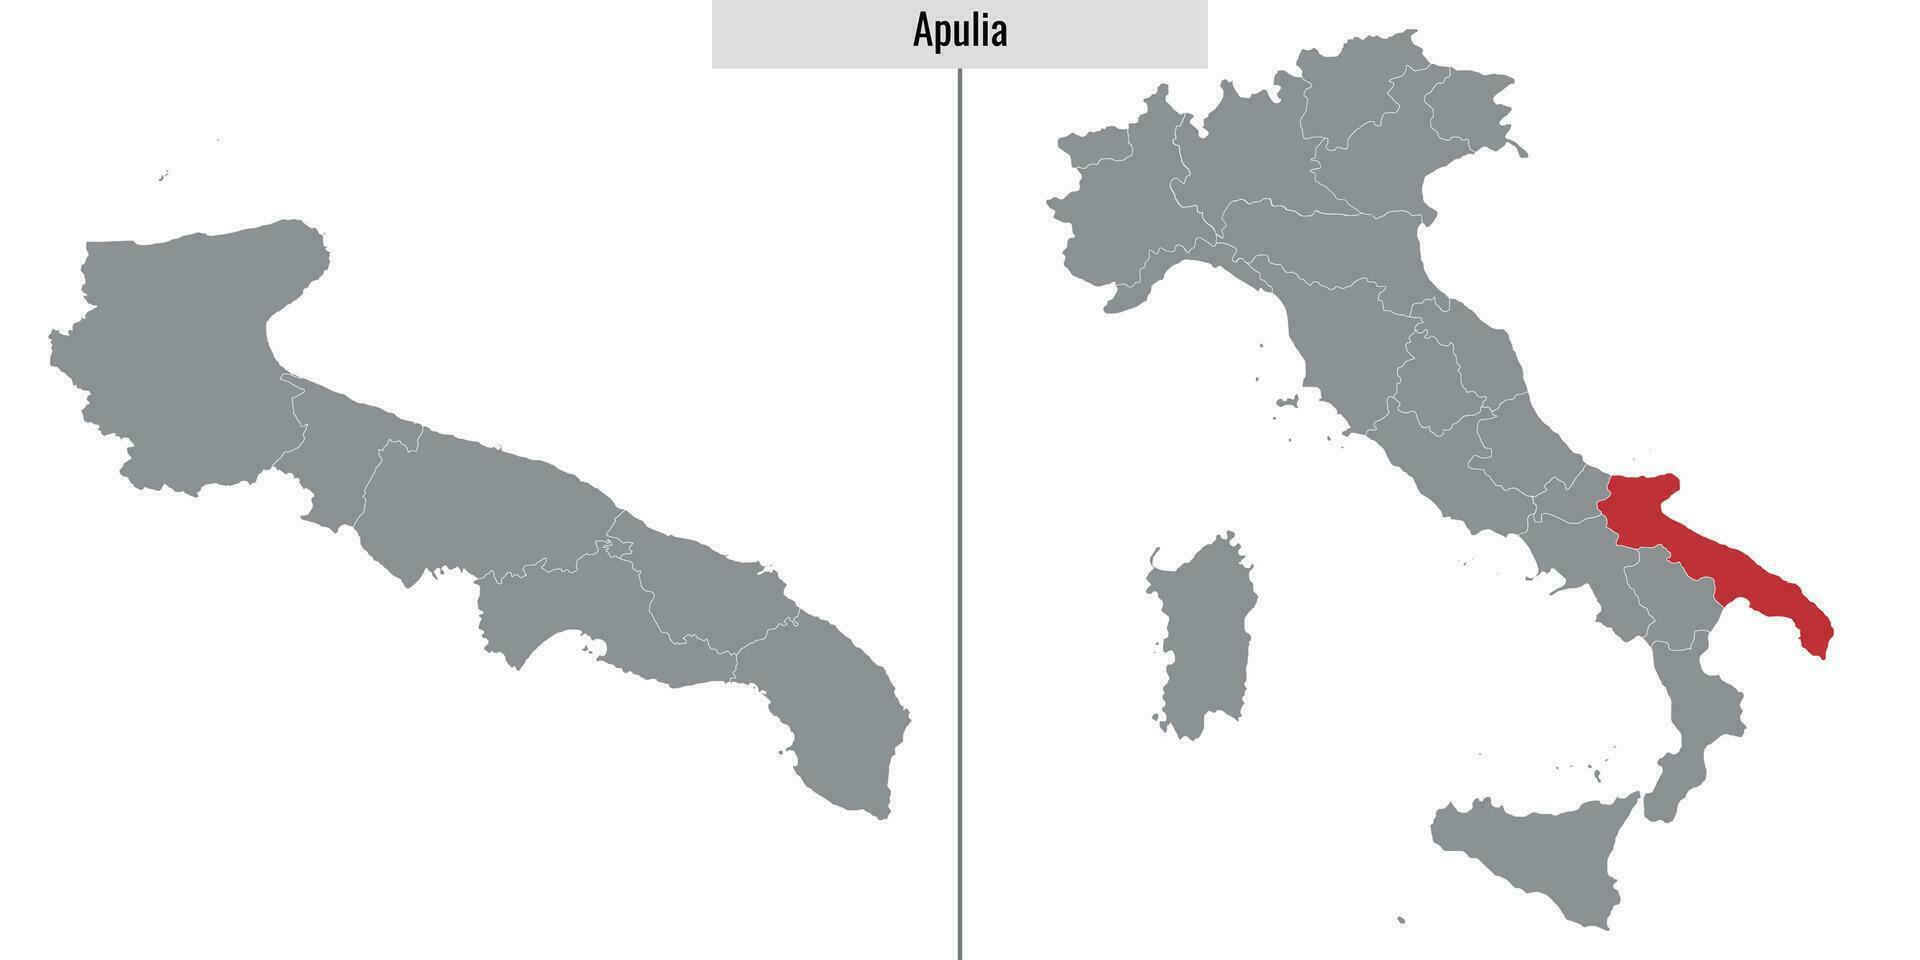 map province of Italy vector